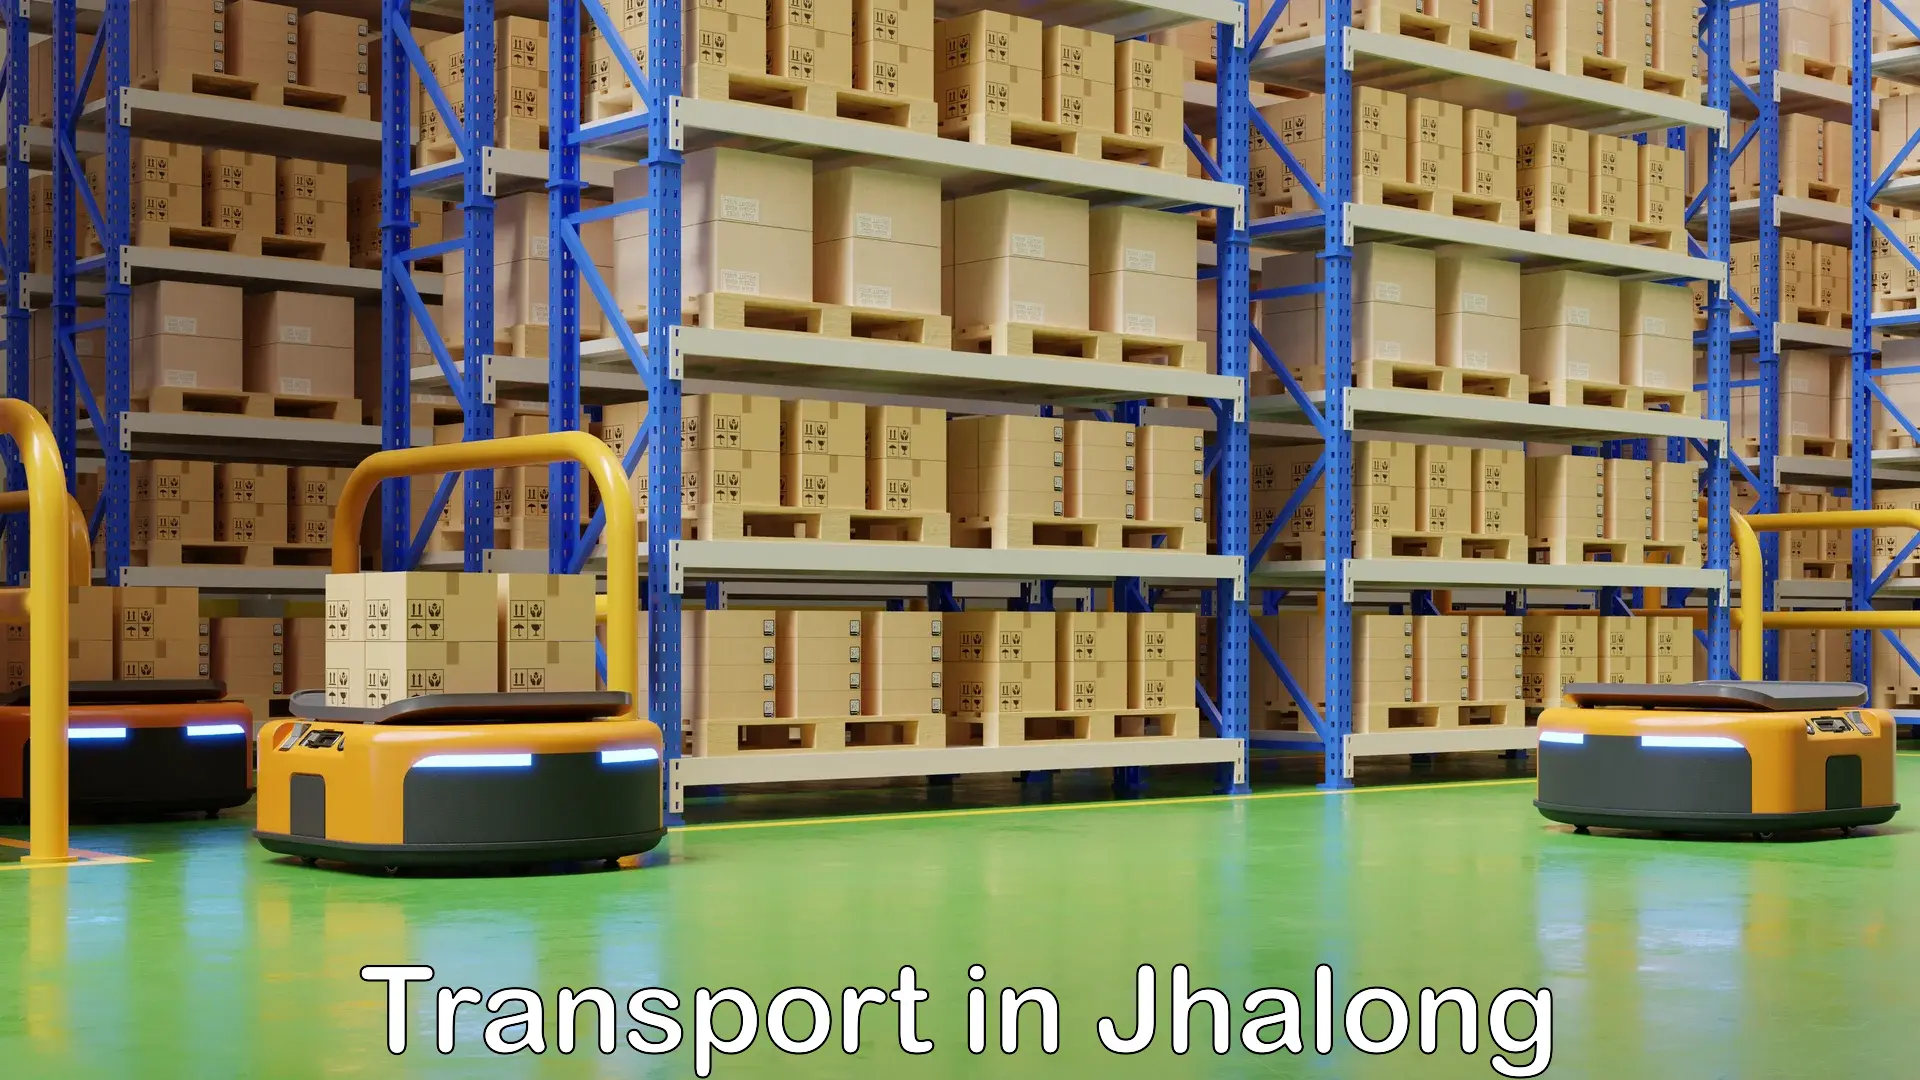 Interstate transport services in Jhalong